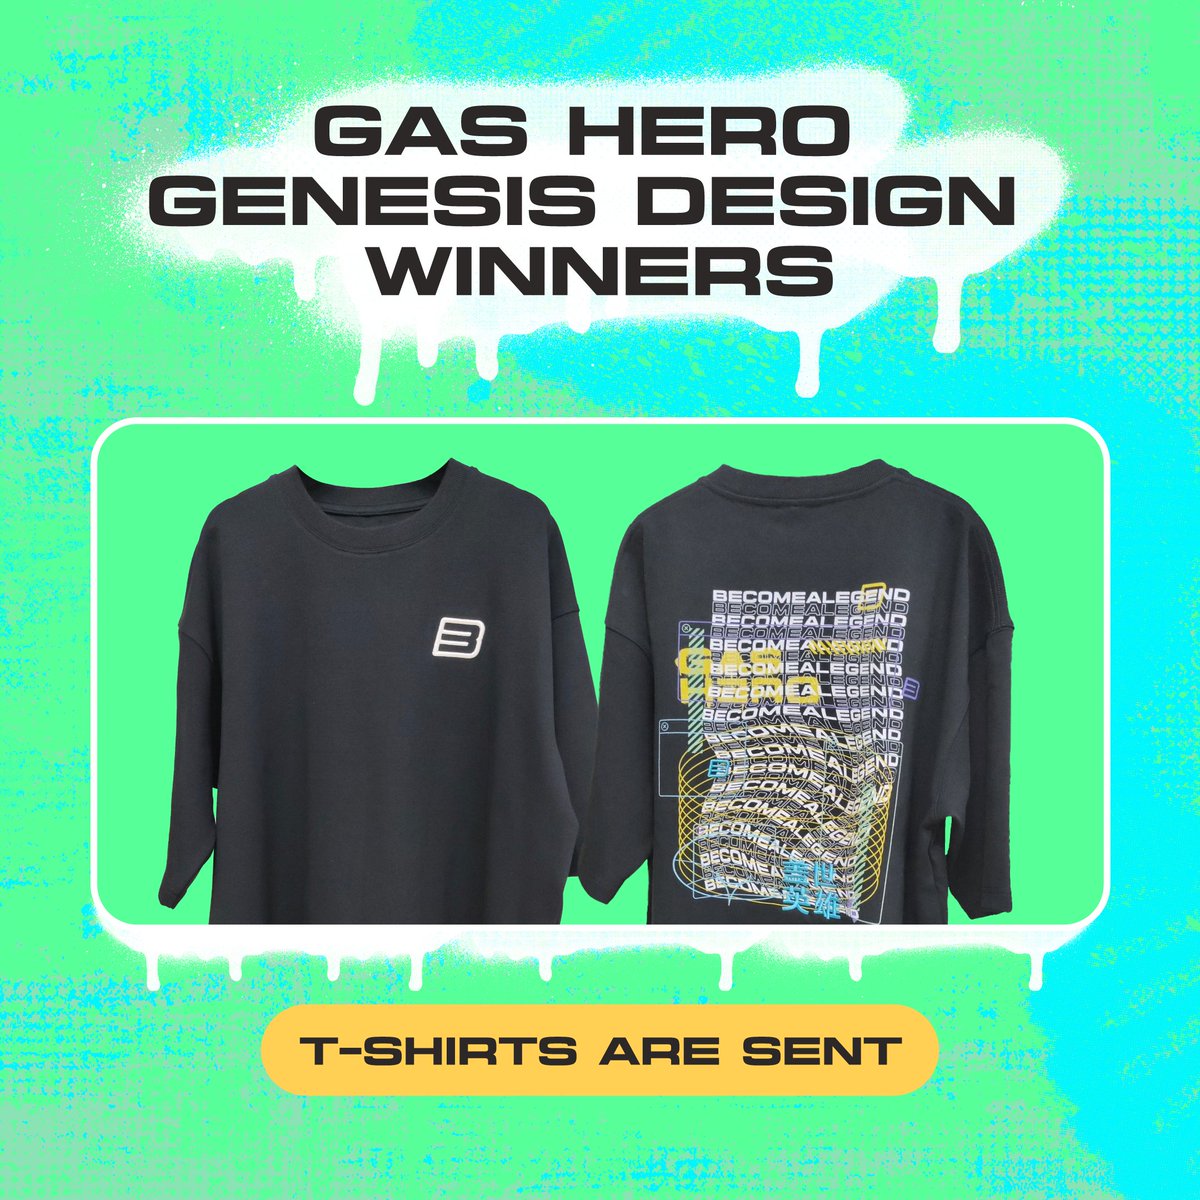 GasMo 💚 We're excited to announce that T-Shirts awarded to winners of the #GasHeroGenesis UGC contest have been shipped ✅ Please note: Some regions will take longer than others to receive the items. Thank you for your patience! If you received a T-Shirt, share a pic in the…